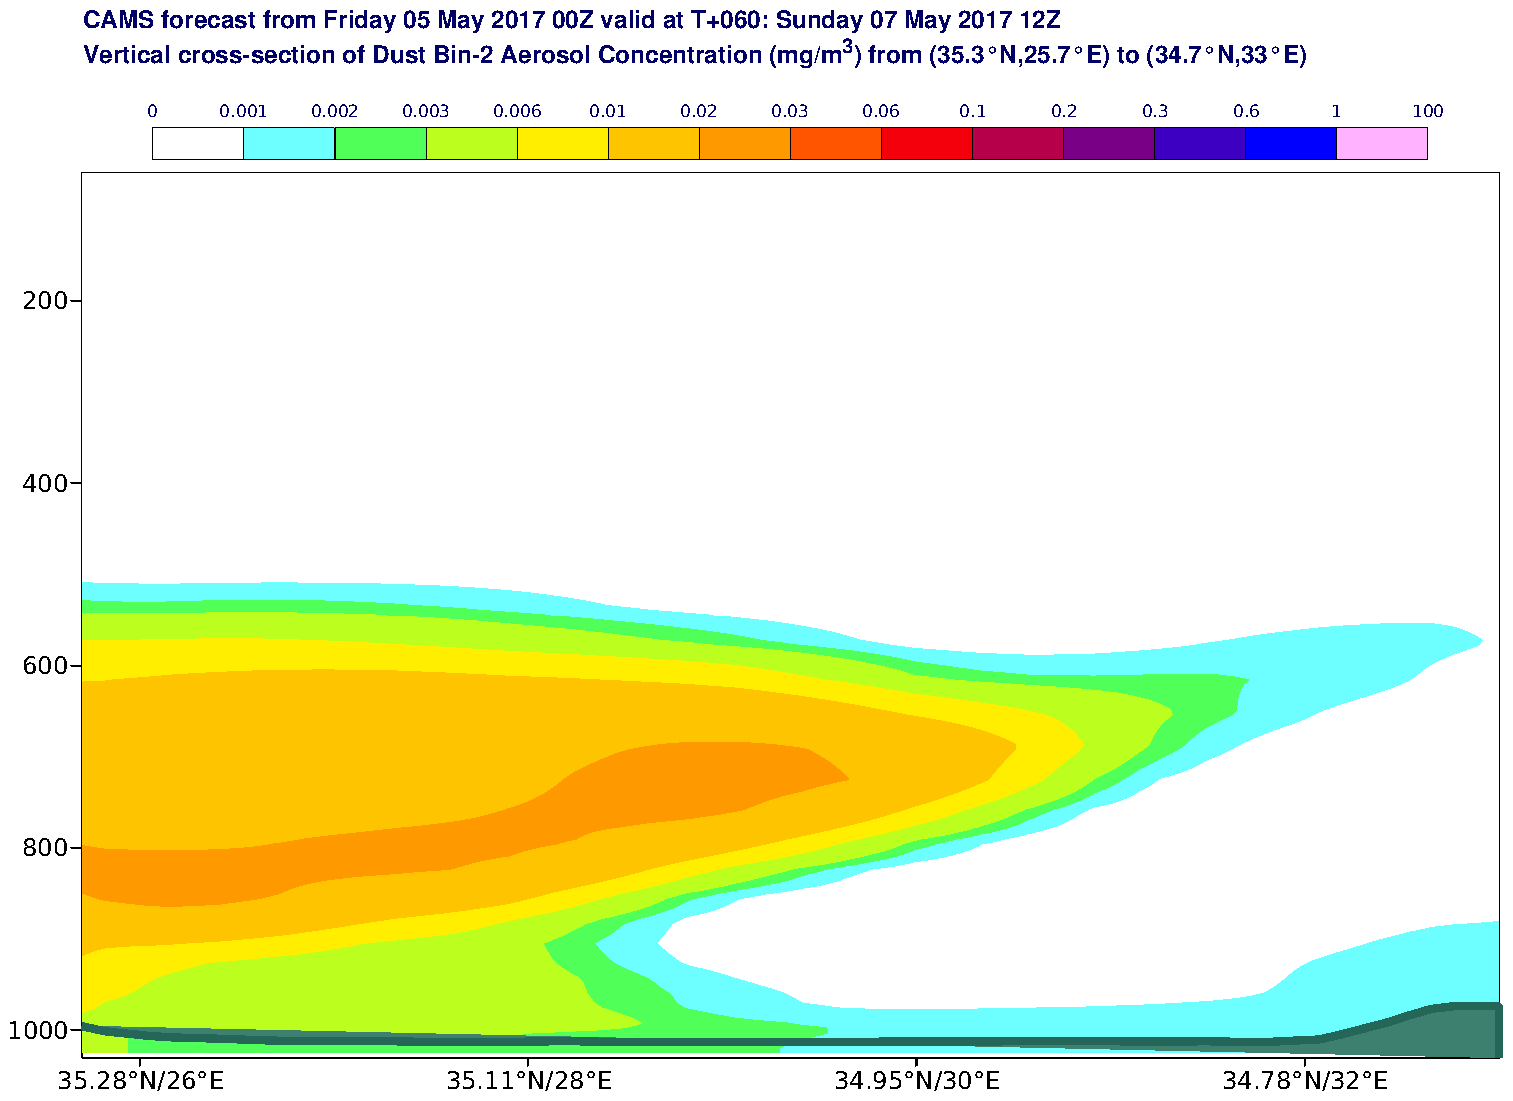 Vertical cross-section of Dust Bin-2 Aerosol Concentration (mg/m3) valid at T60 - 2017-05-07 12:00